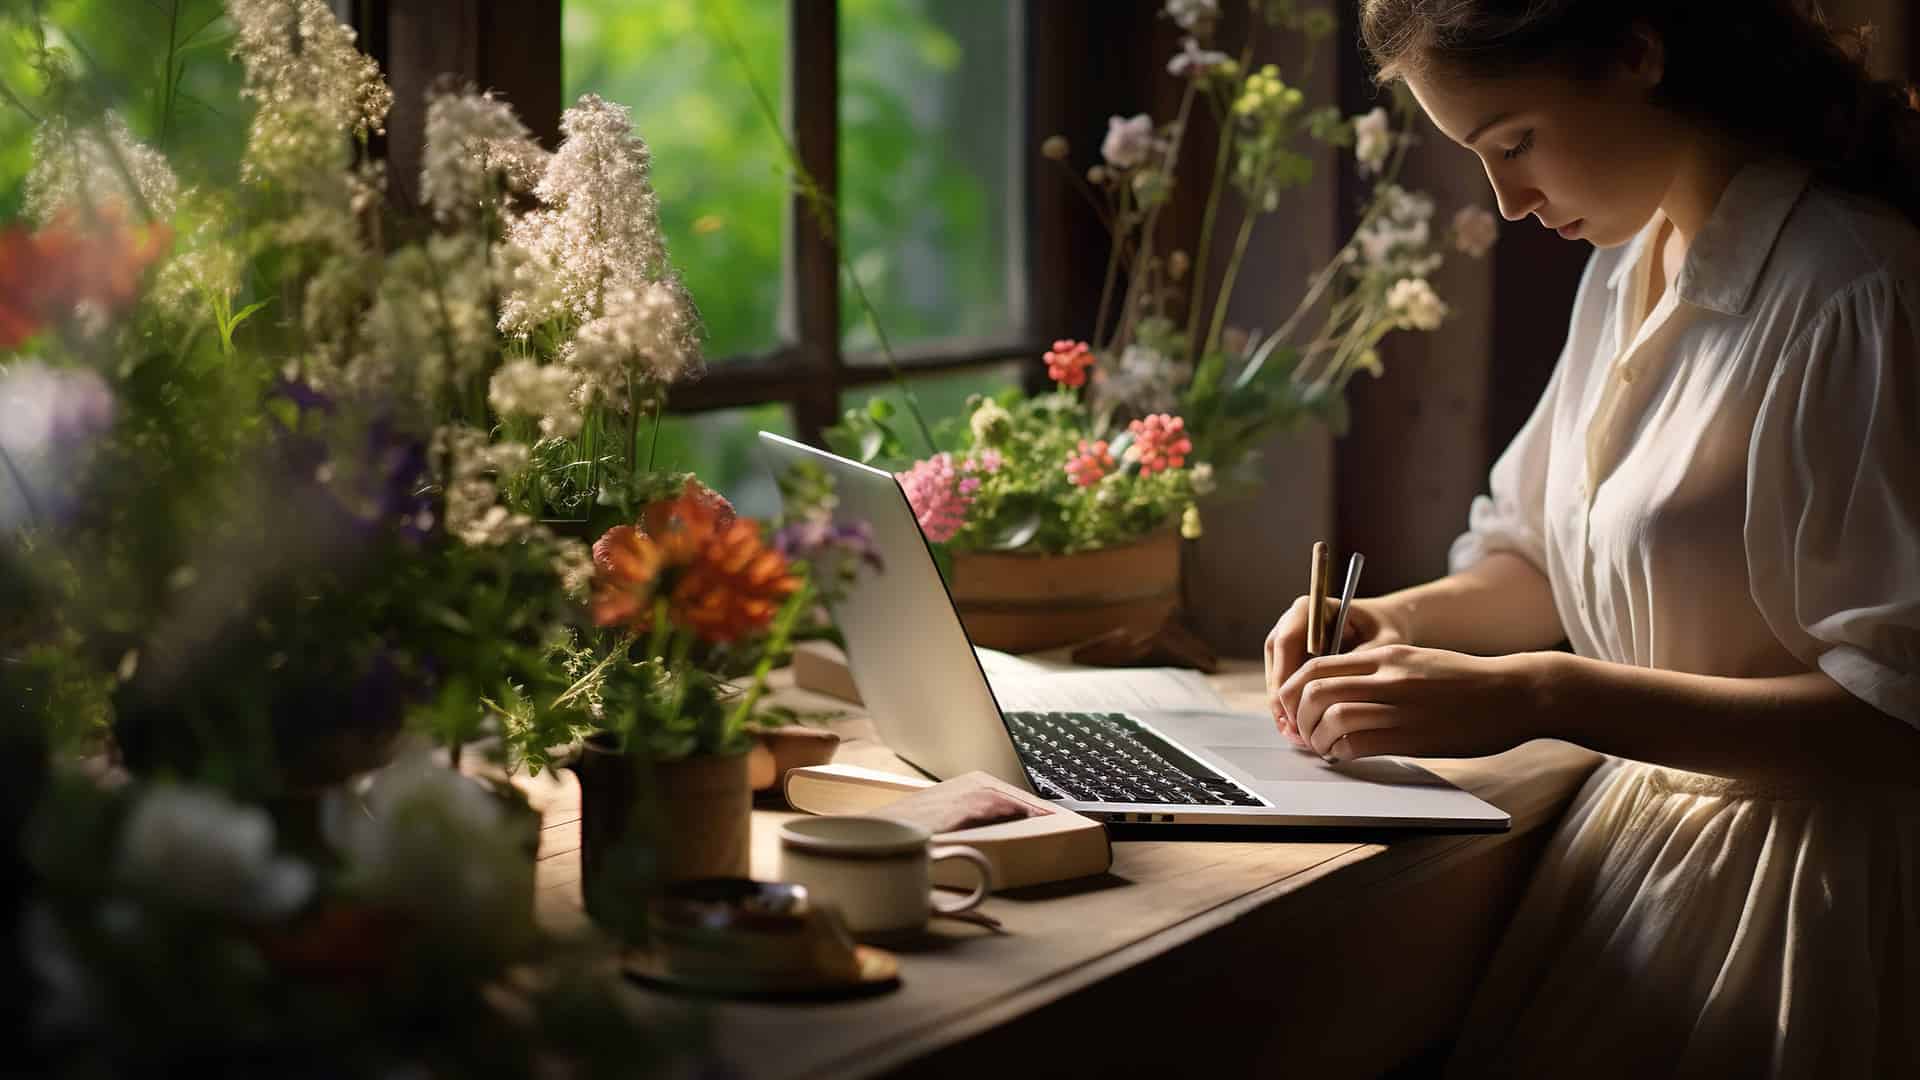 Young woman writing and typing on a laptop computer in a room full of flowers